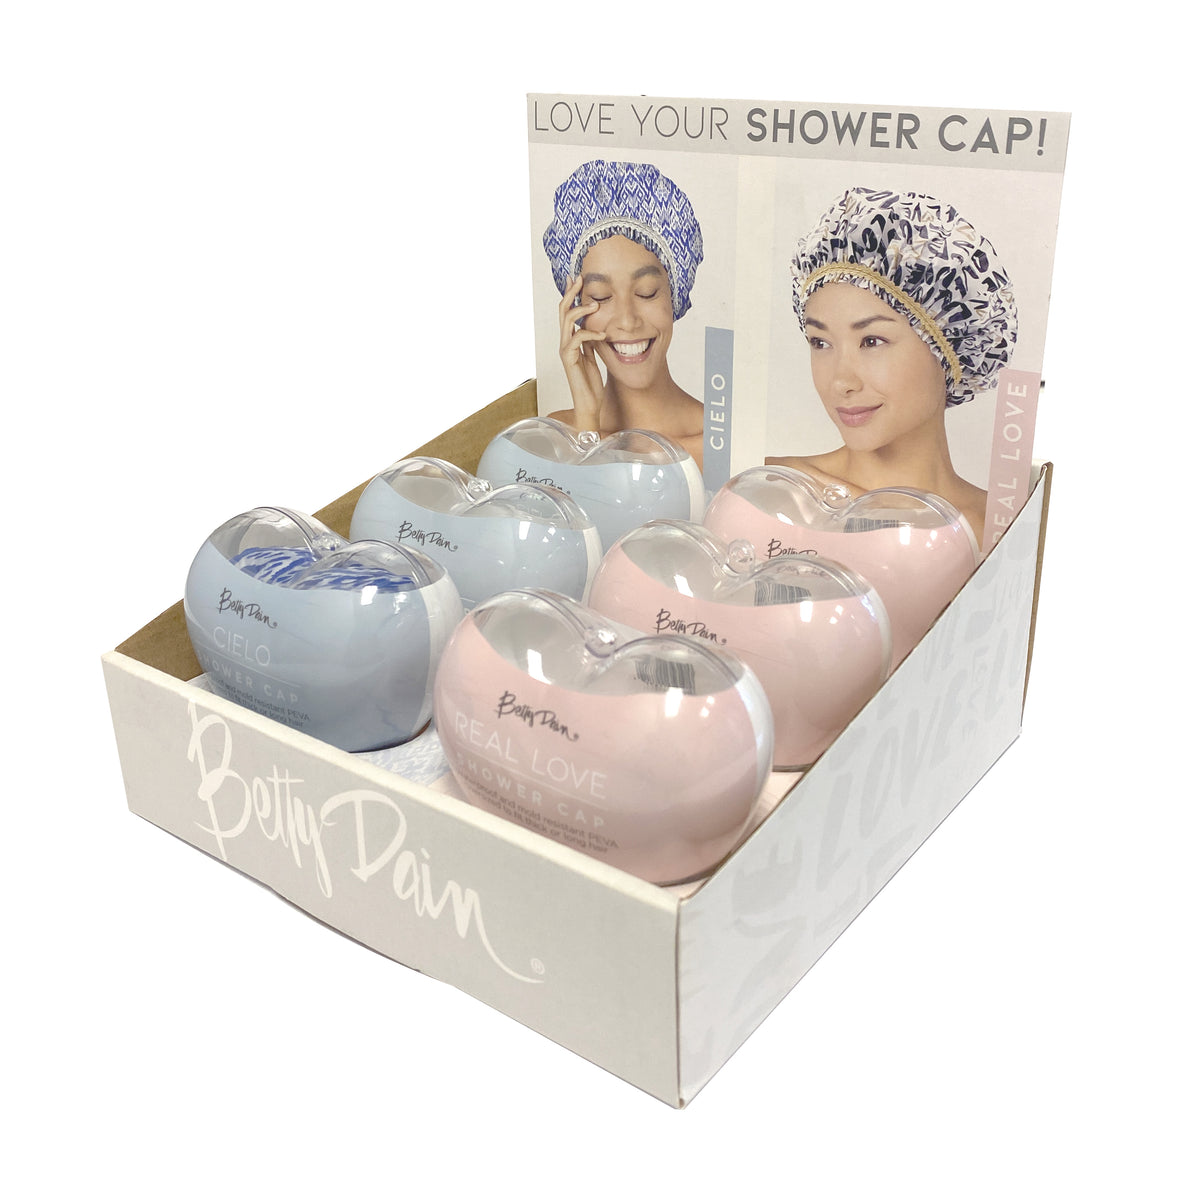 Shower Cap Display for Salon Upsell | Salon Upsell Accessories Shower Caps